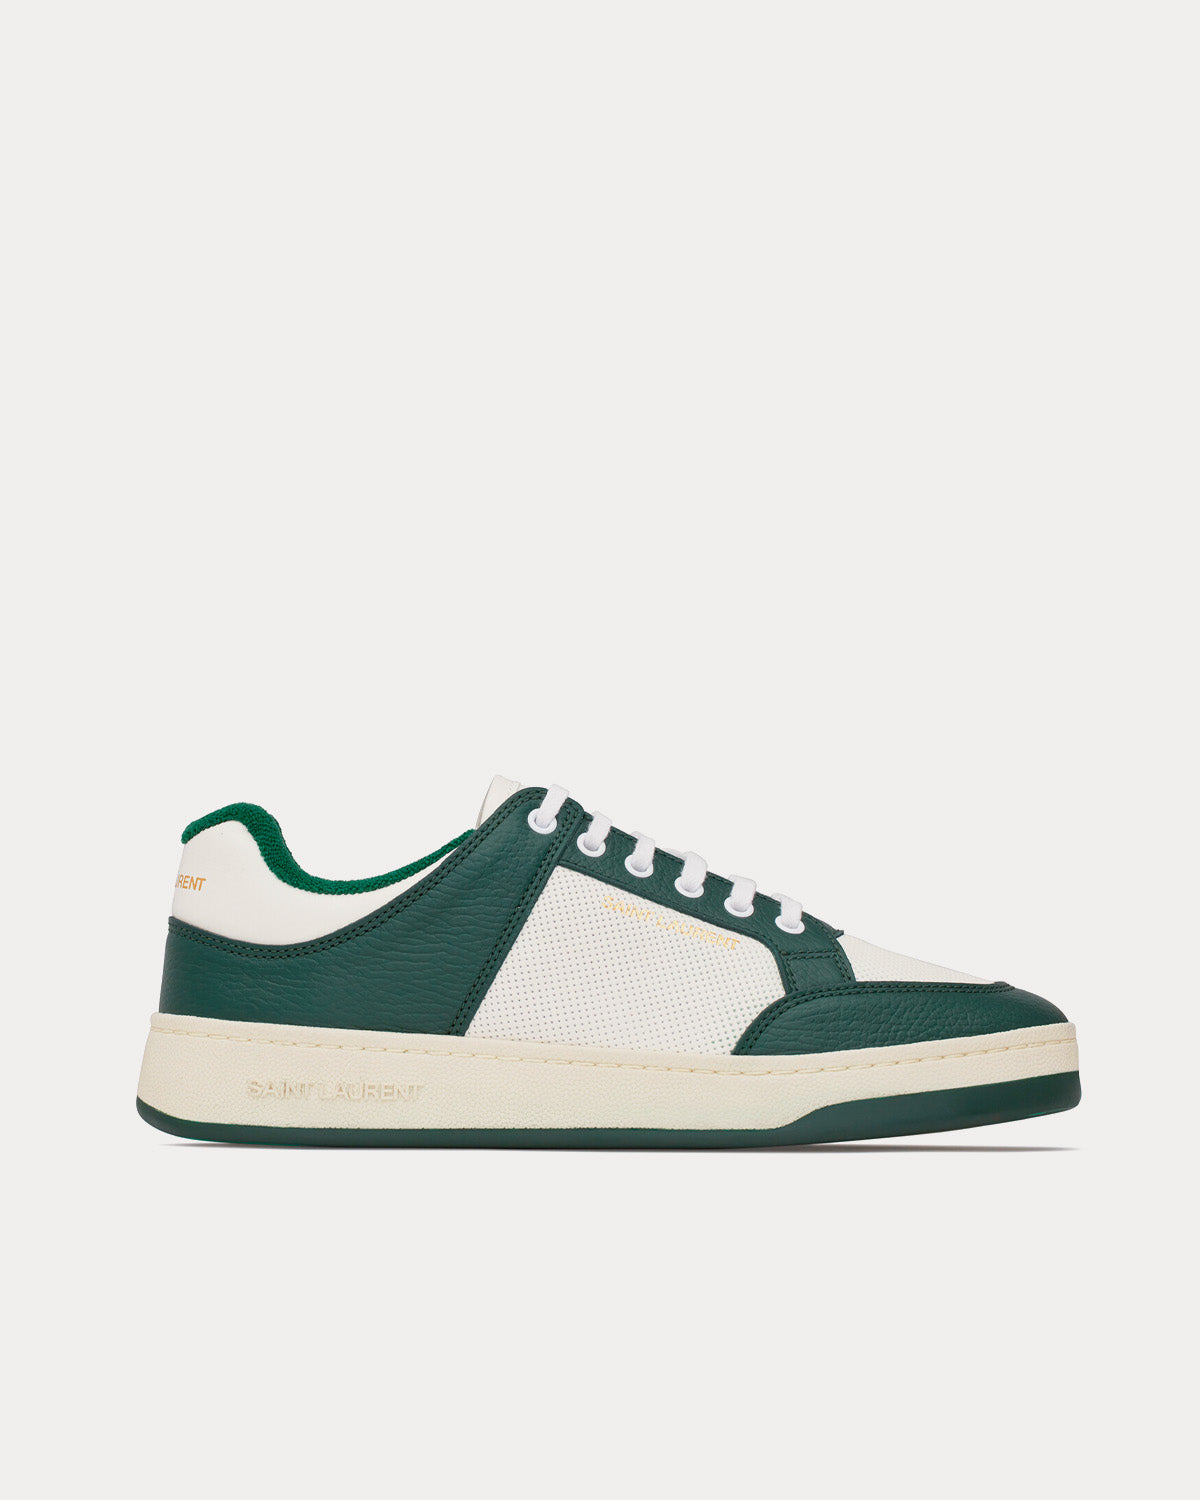 Saint Laurent - SL/61 Smooth & Grained Leather White / Dark Green Low Top Sneakers